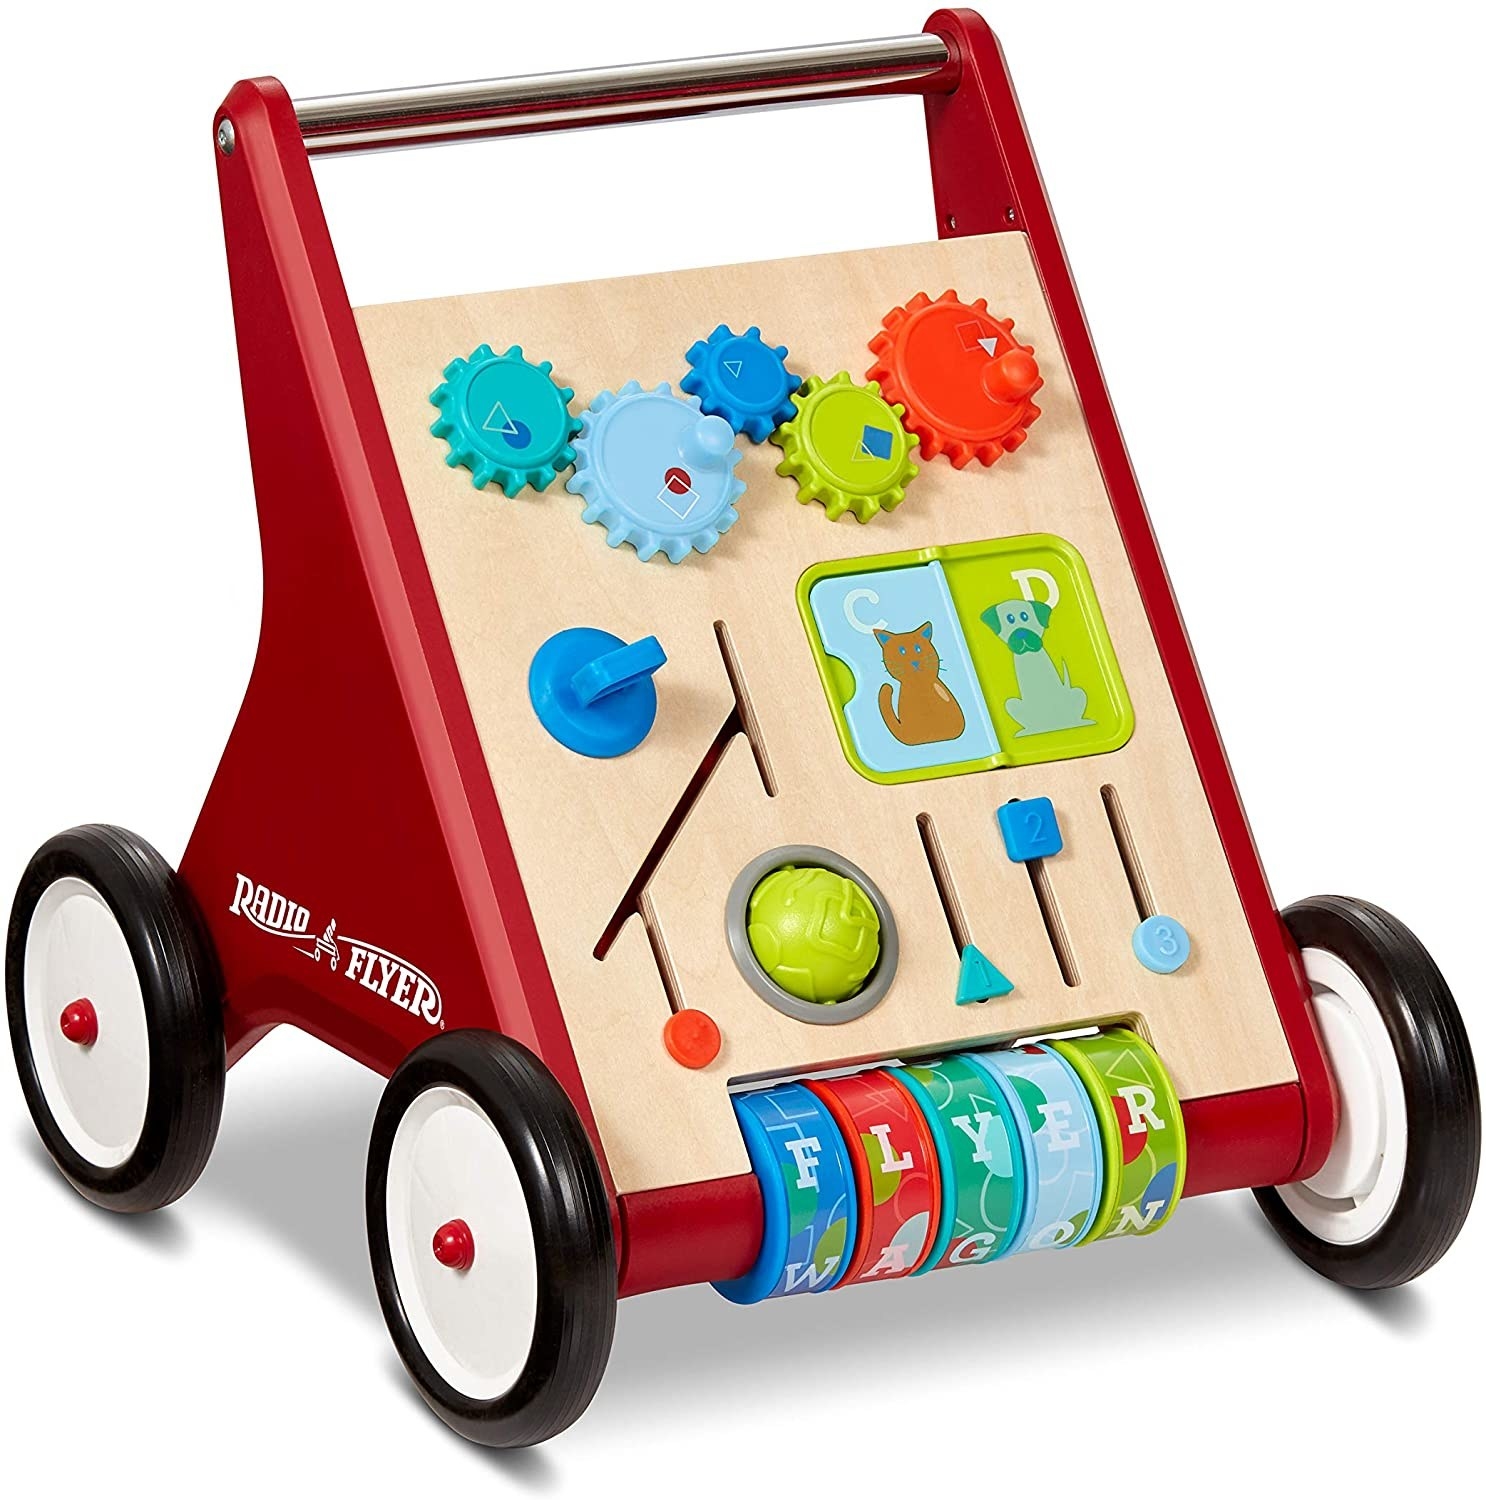 the wooden play toy